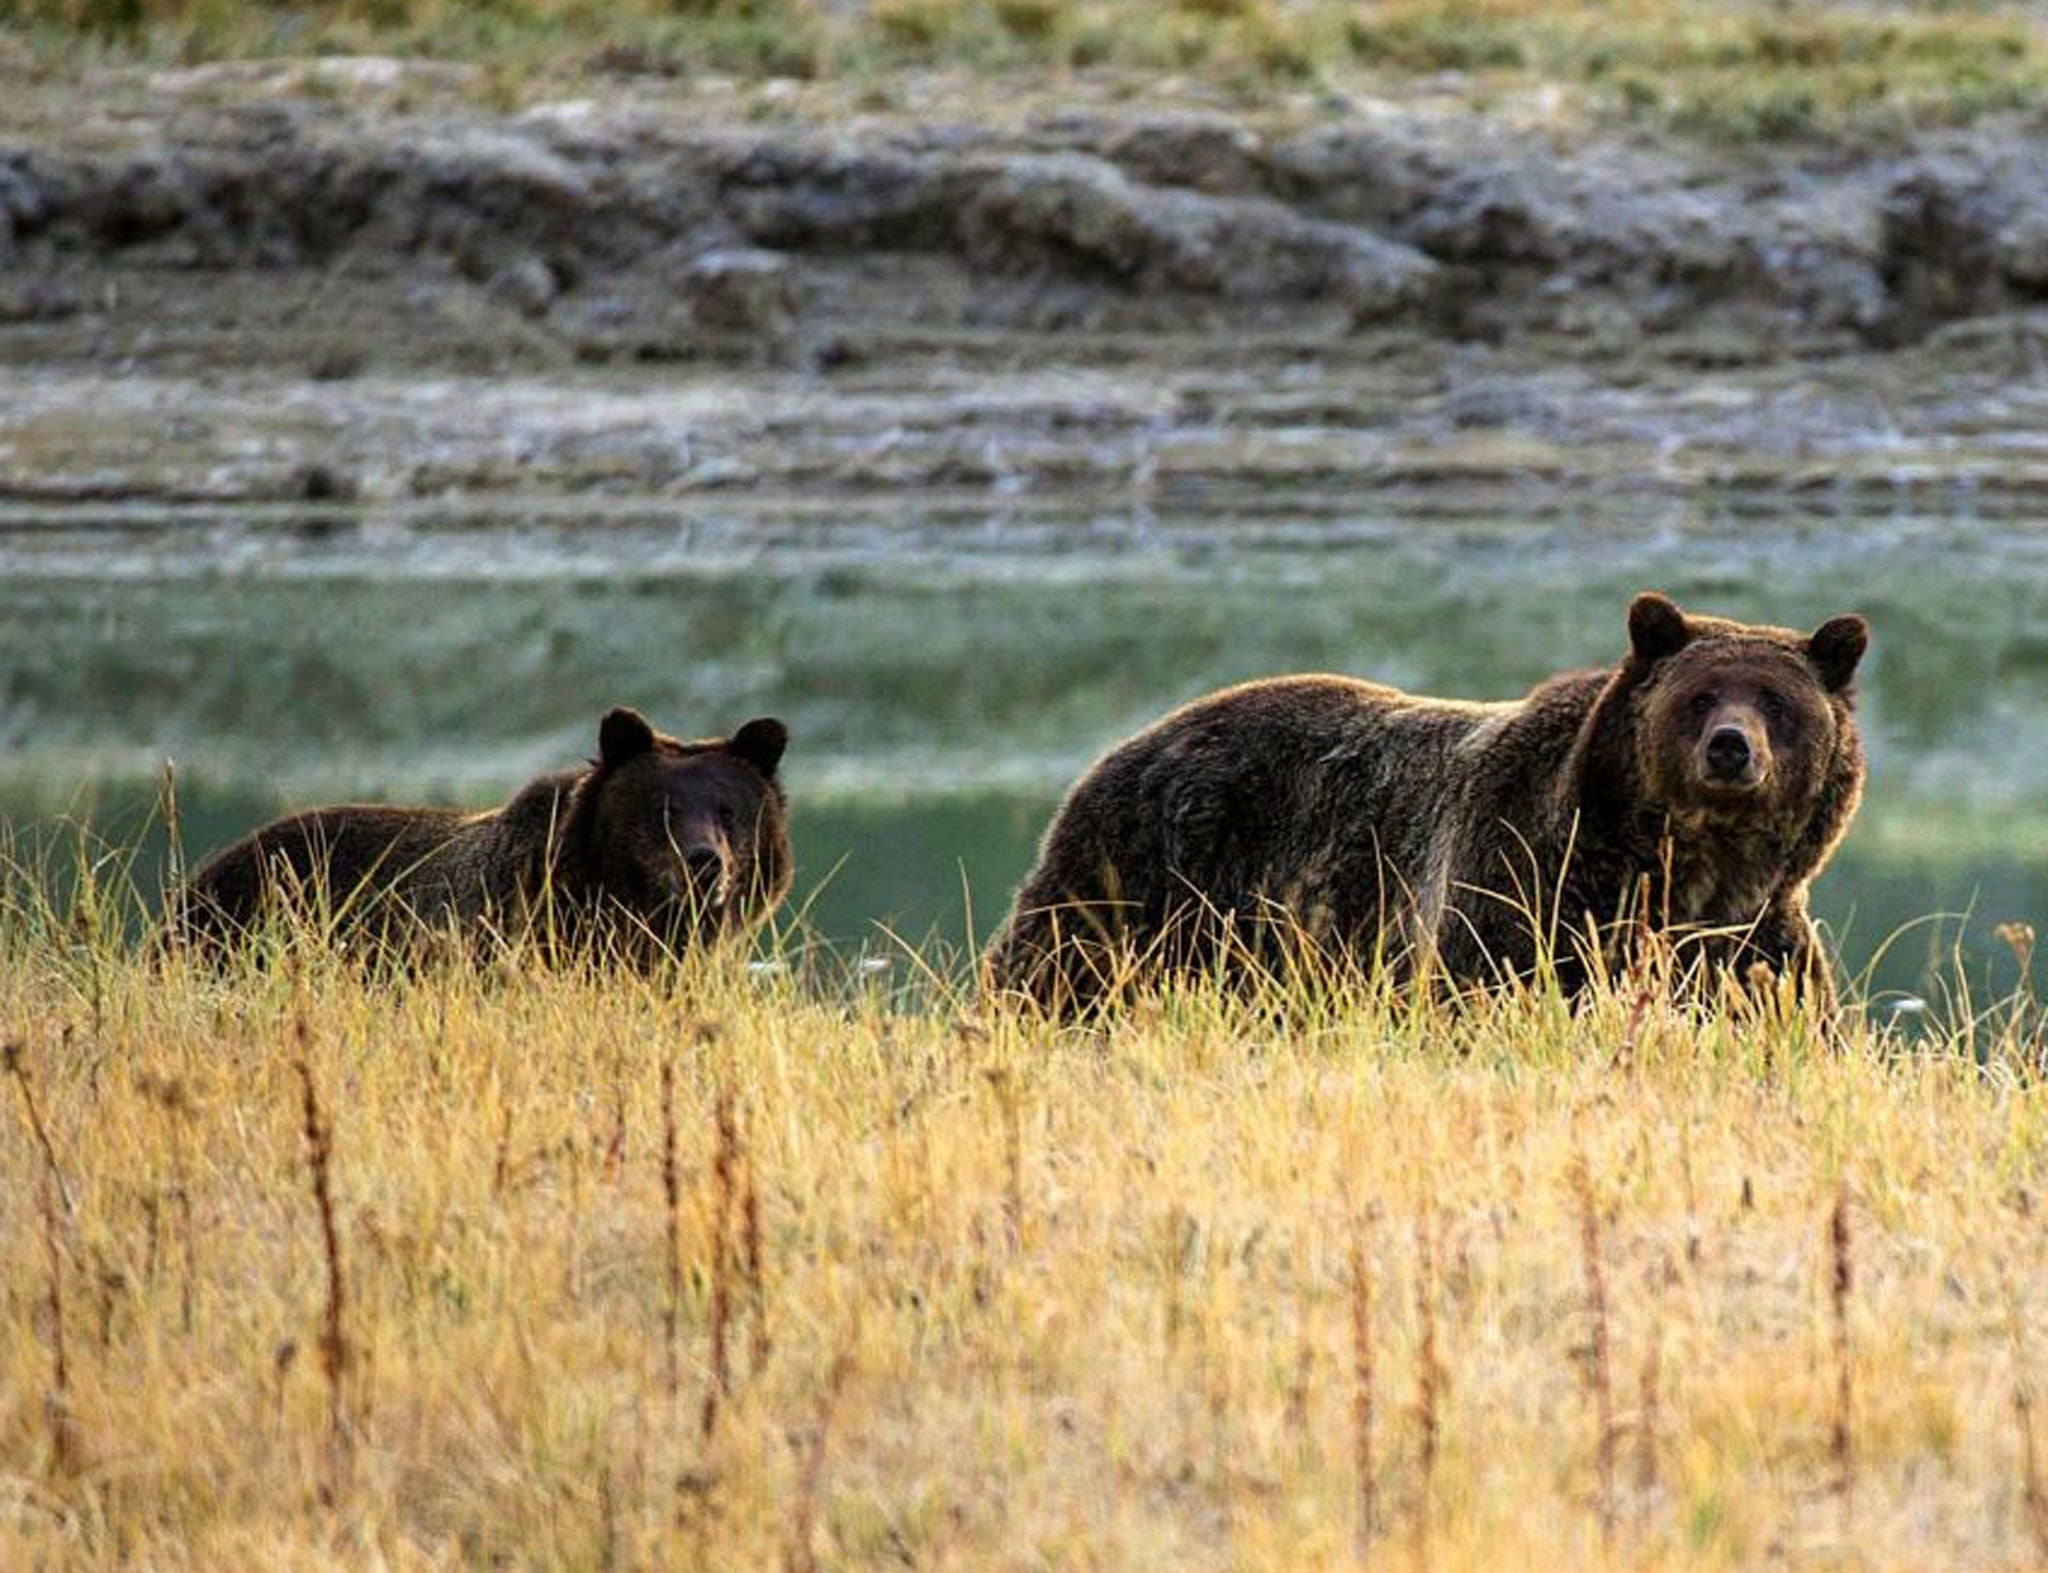 A Grizzly bear mother and her cub in the Yellowstone National Park in Wyoming